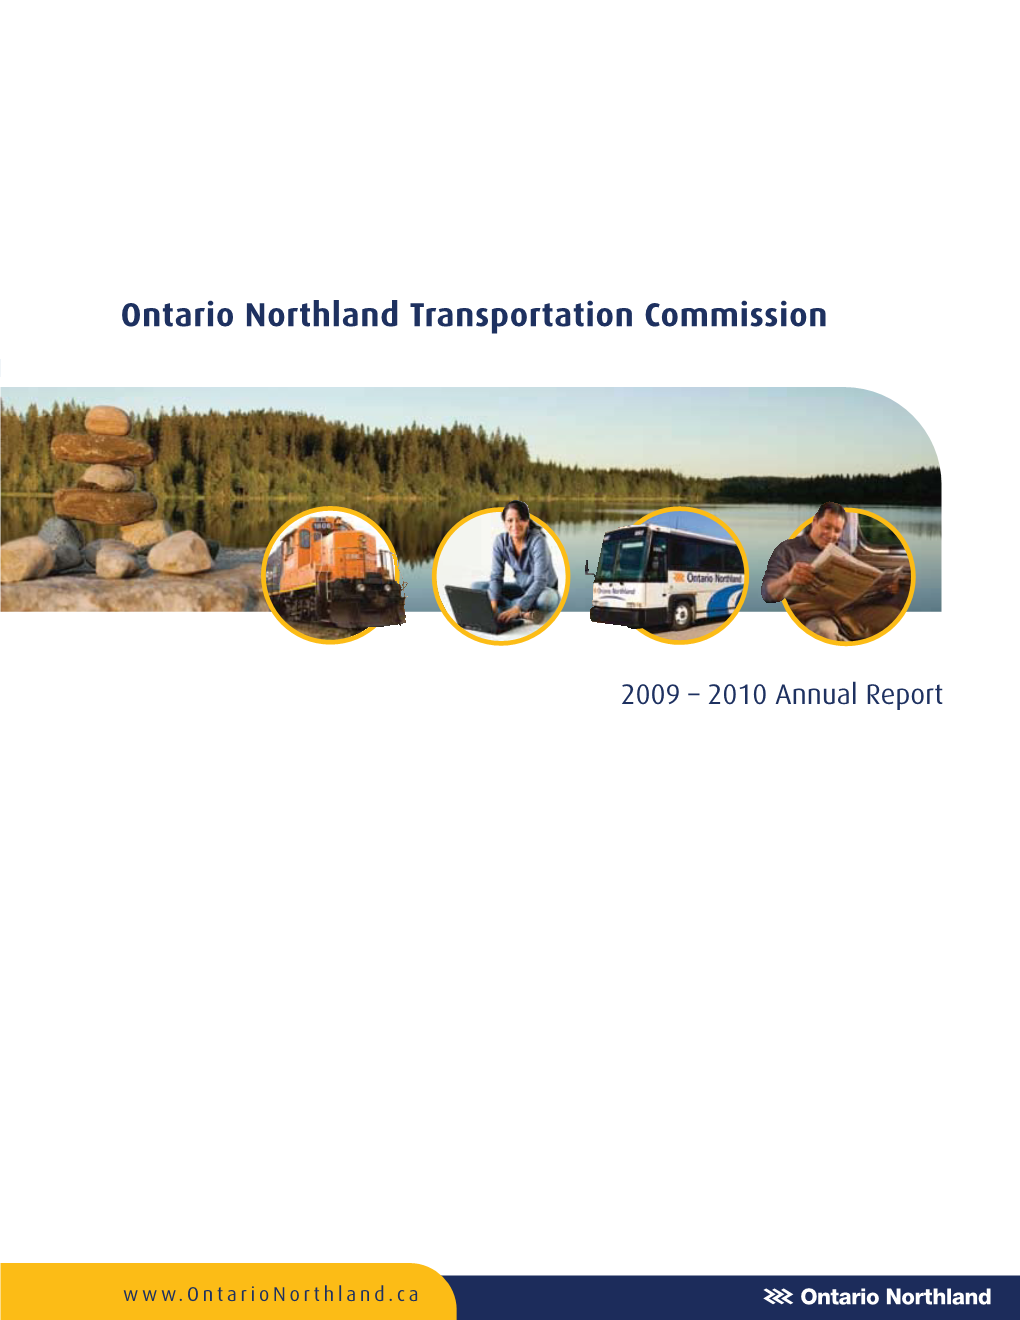 Ontario Northland Transportation Commission and the Minister of Northern Development and Mines